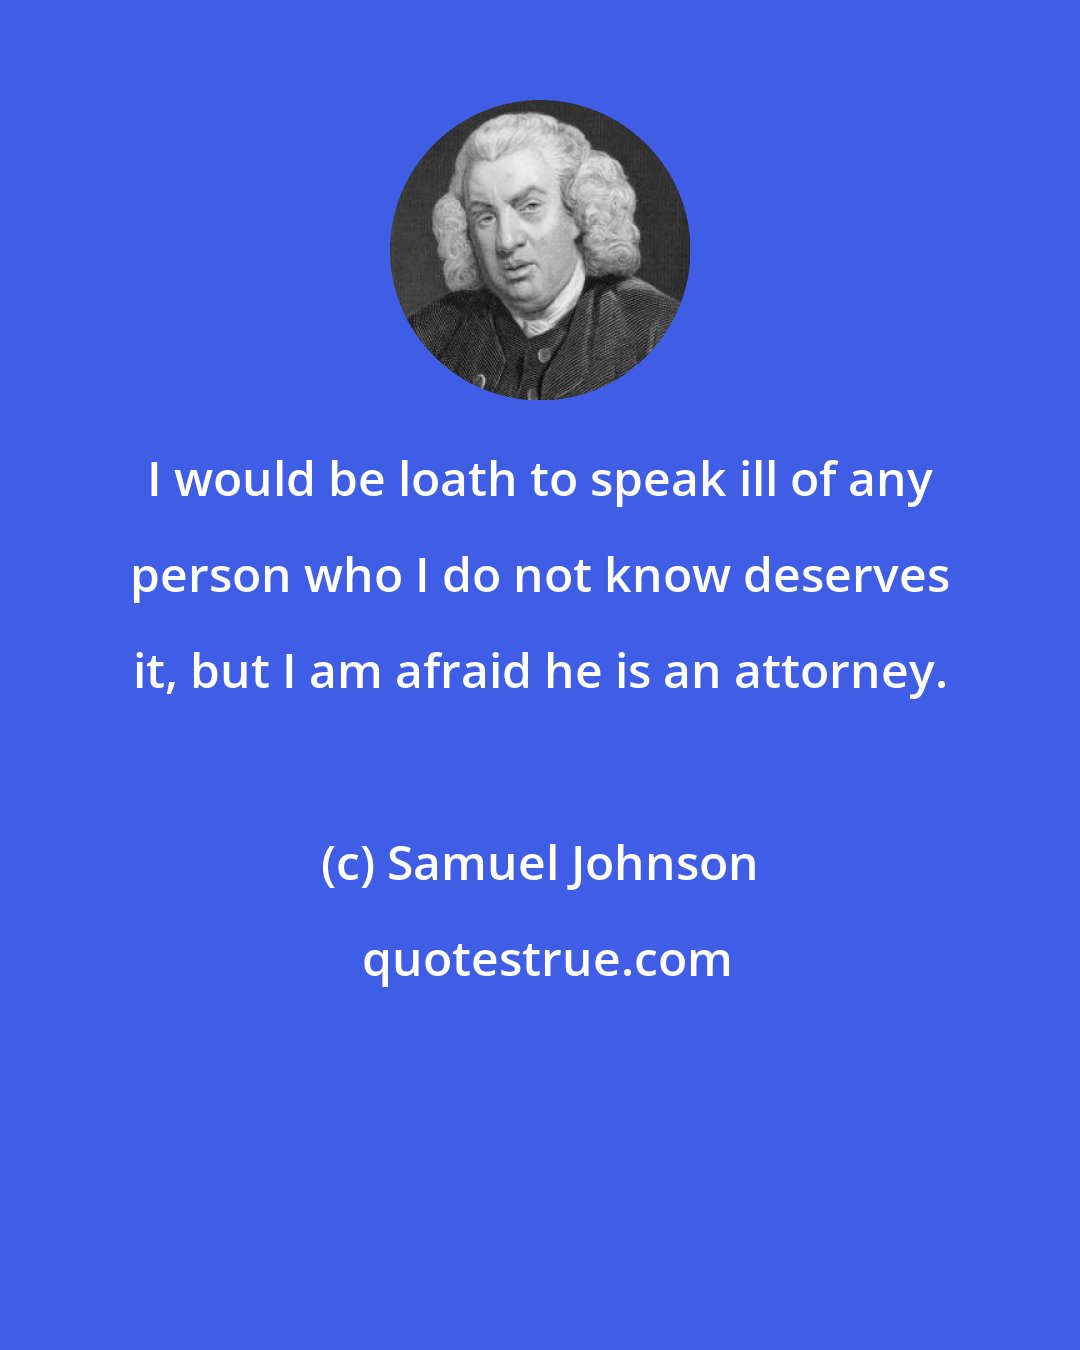 Samuel Johnson: I would be loath to speak ill of any person who I do not know deserves it, but I am afraid he is an attorney.